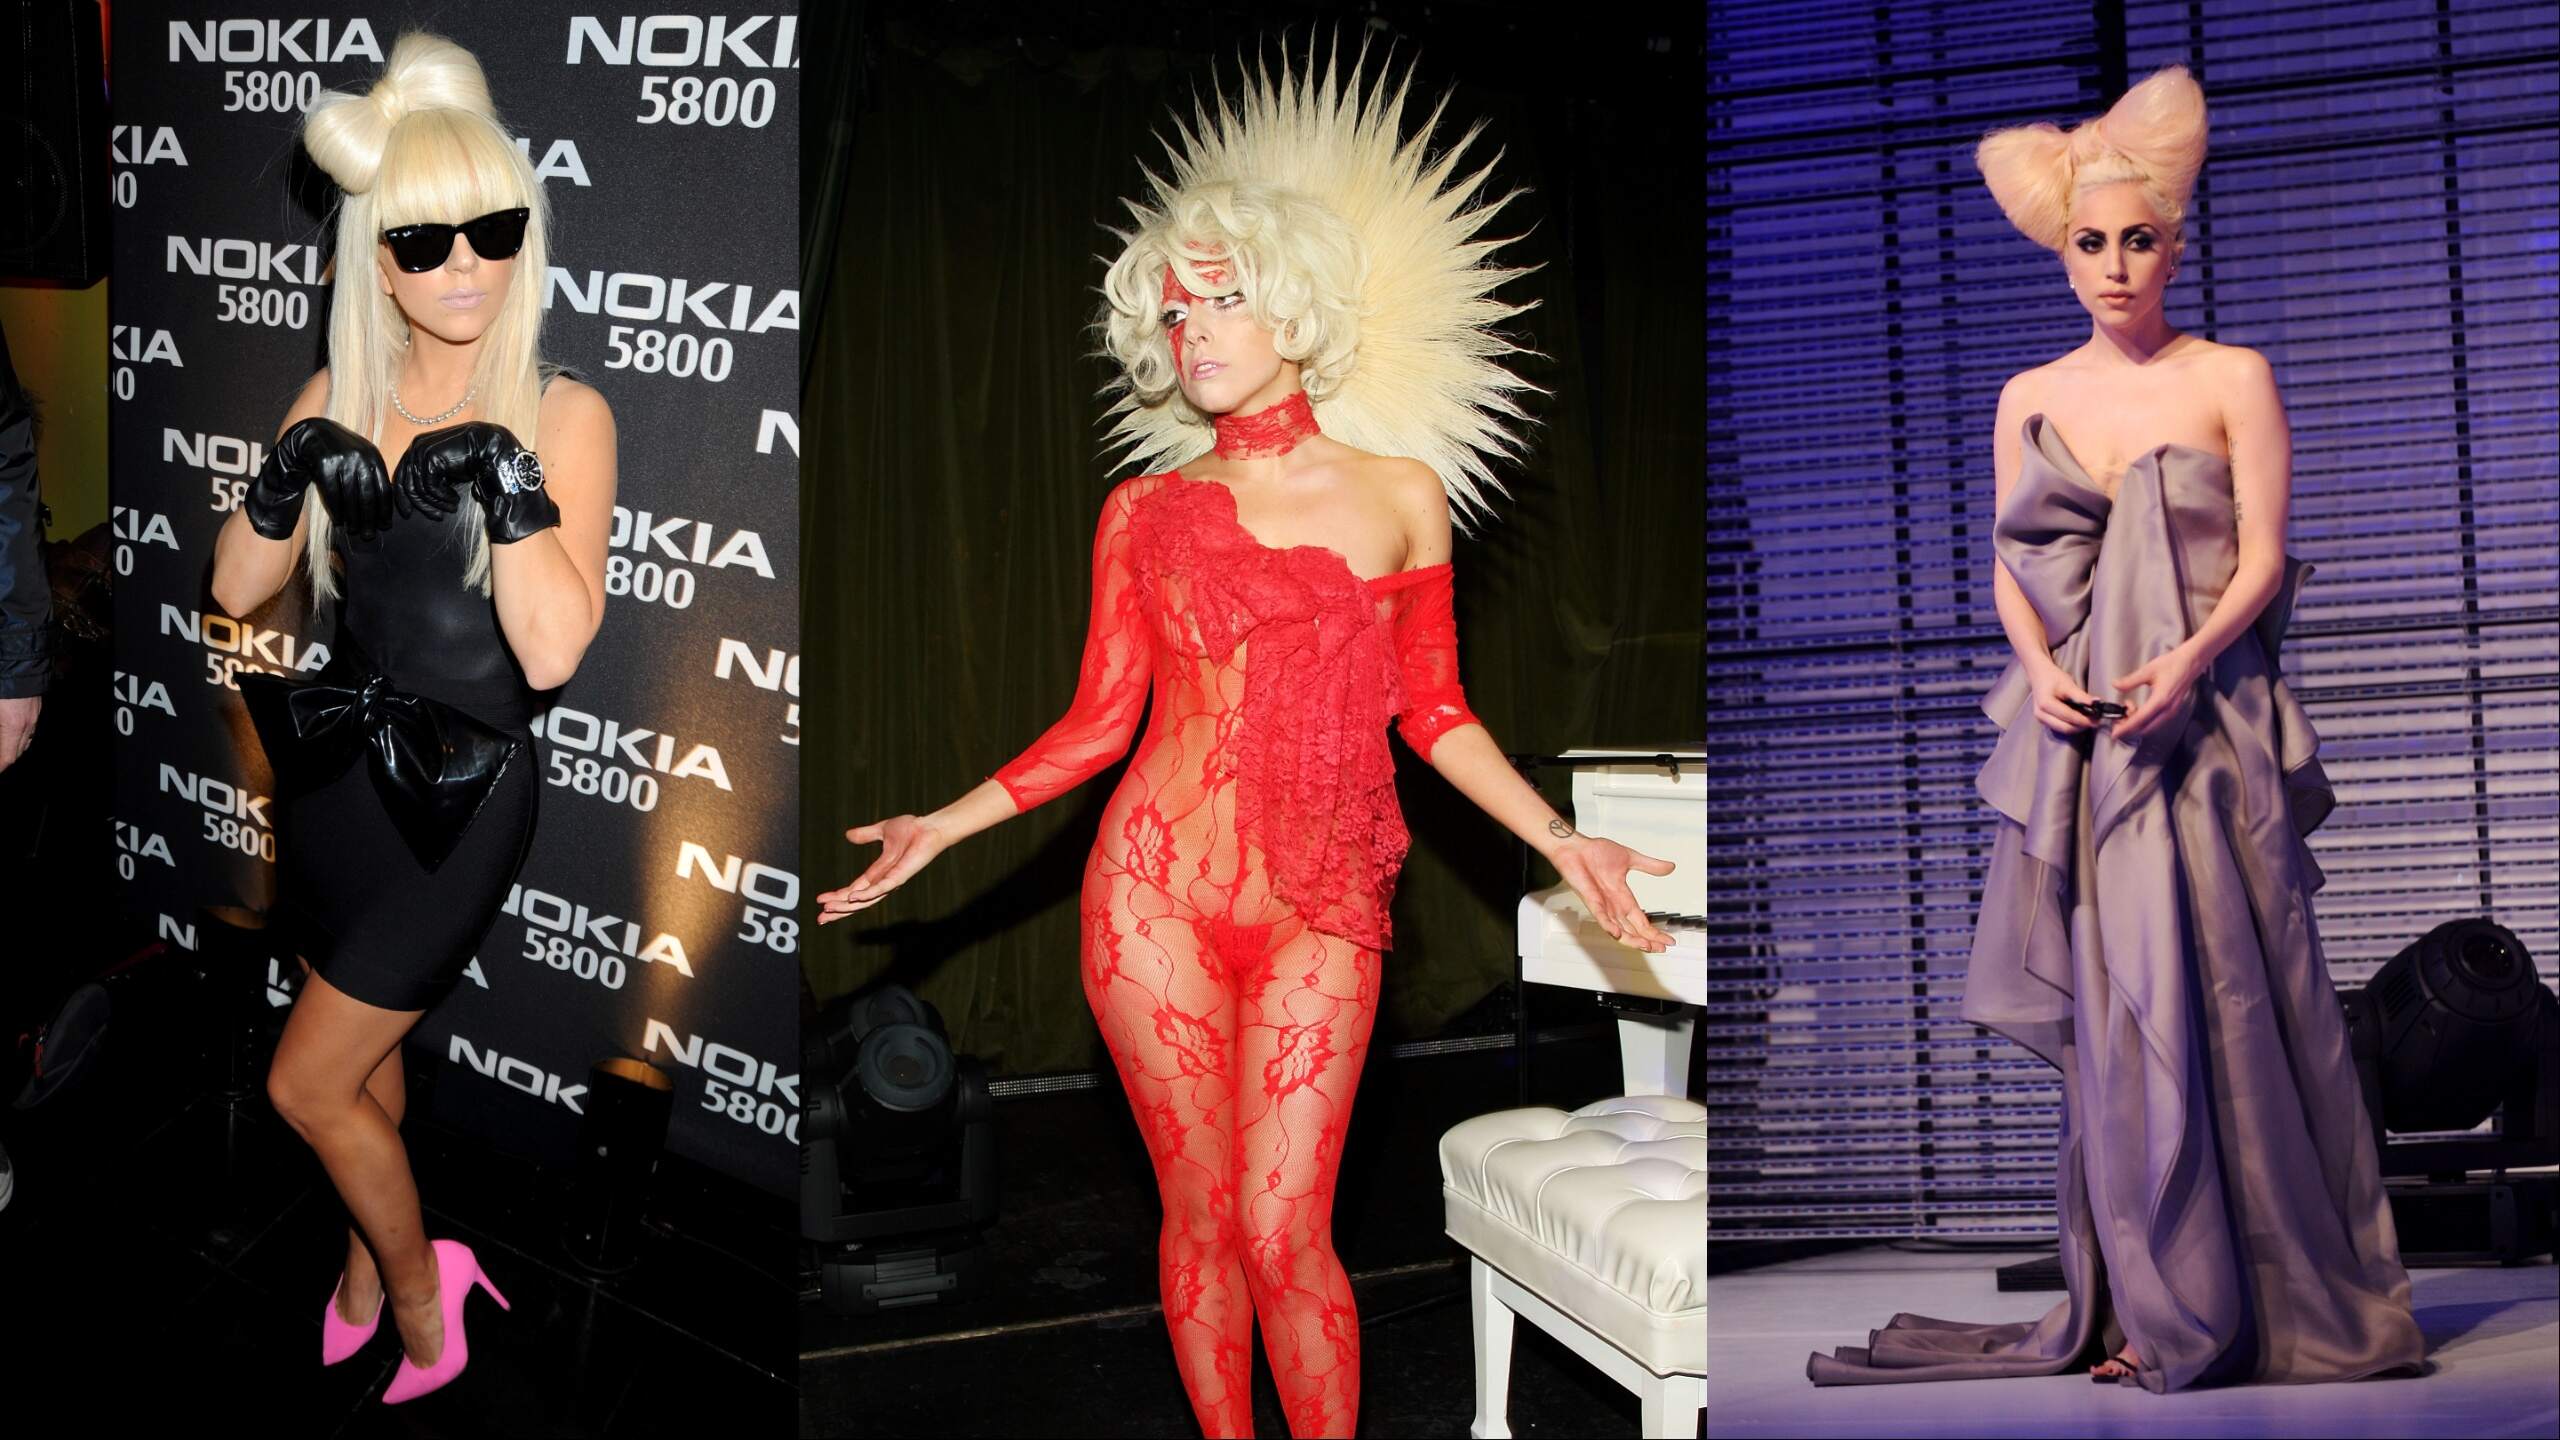 Singer Lady Gaga performs in 2009 at three different events wearing hair bows